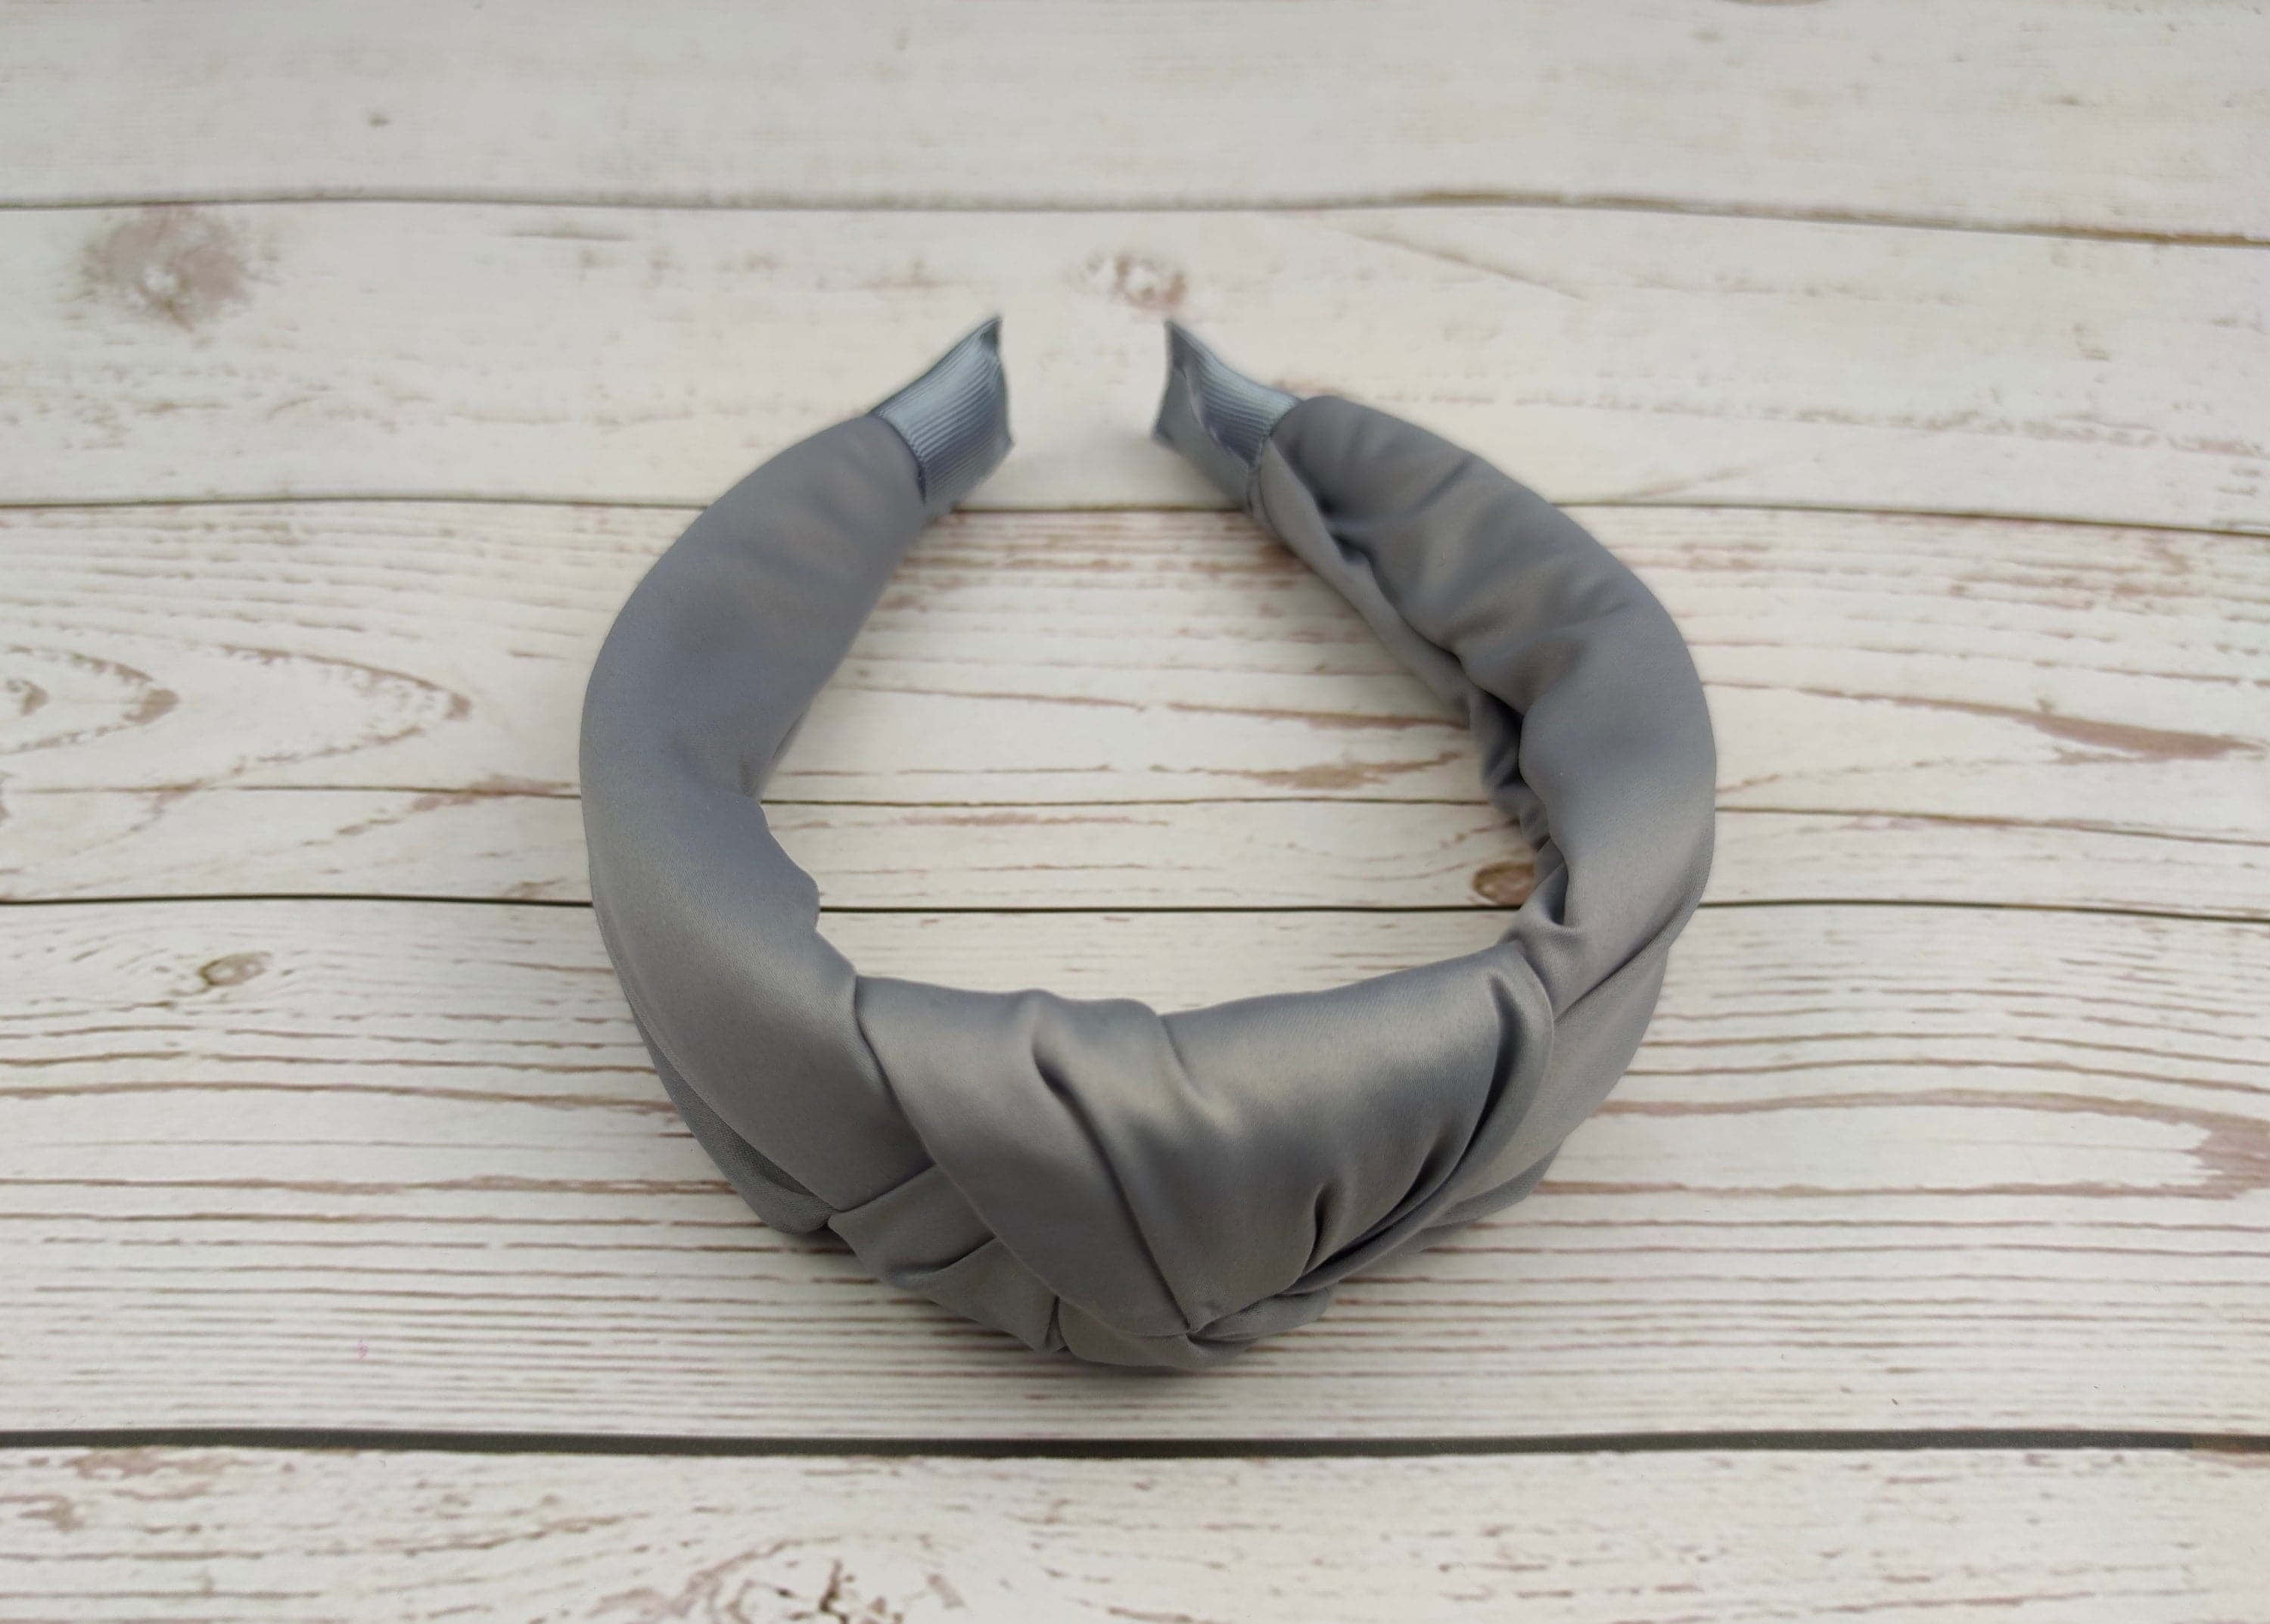 If you are looking for a versatile, stylish, and comfortable hairband, look no further than this Light Gray Headband. It is made of high-quality materials and can be worn with a variety of outfits.